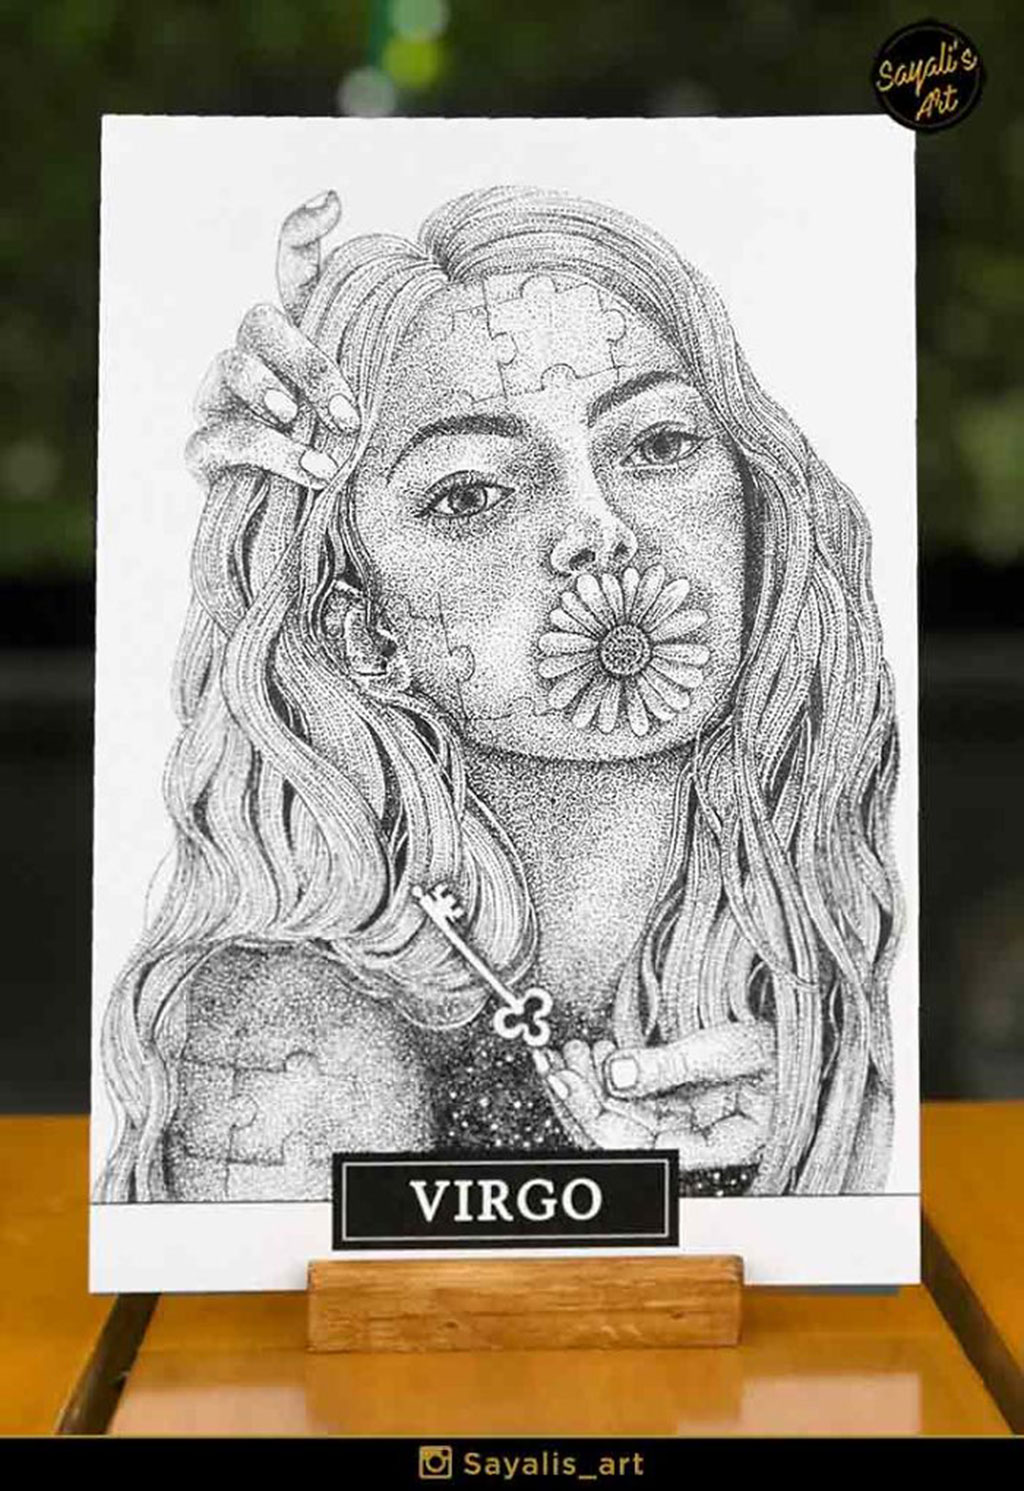 Stippled Drawing of a Virgo Woman Made of Puzzle Pieces and a Flower Over Her Mouth